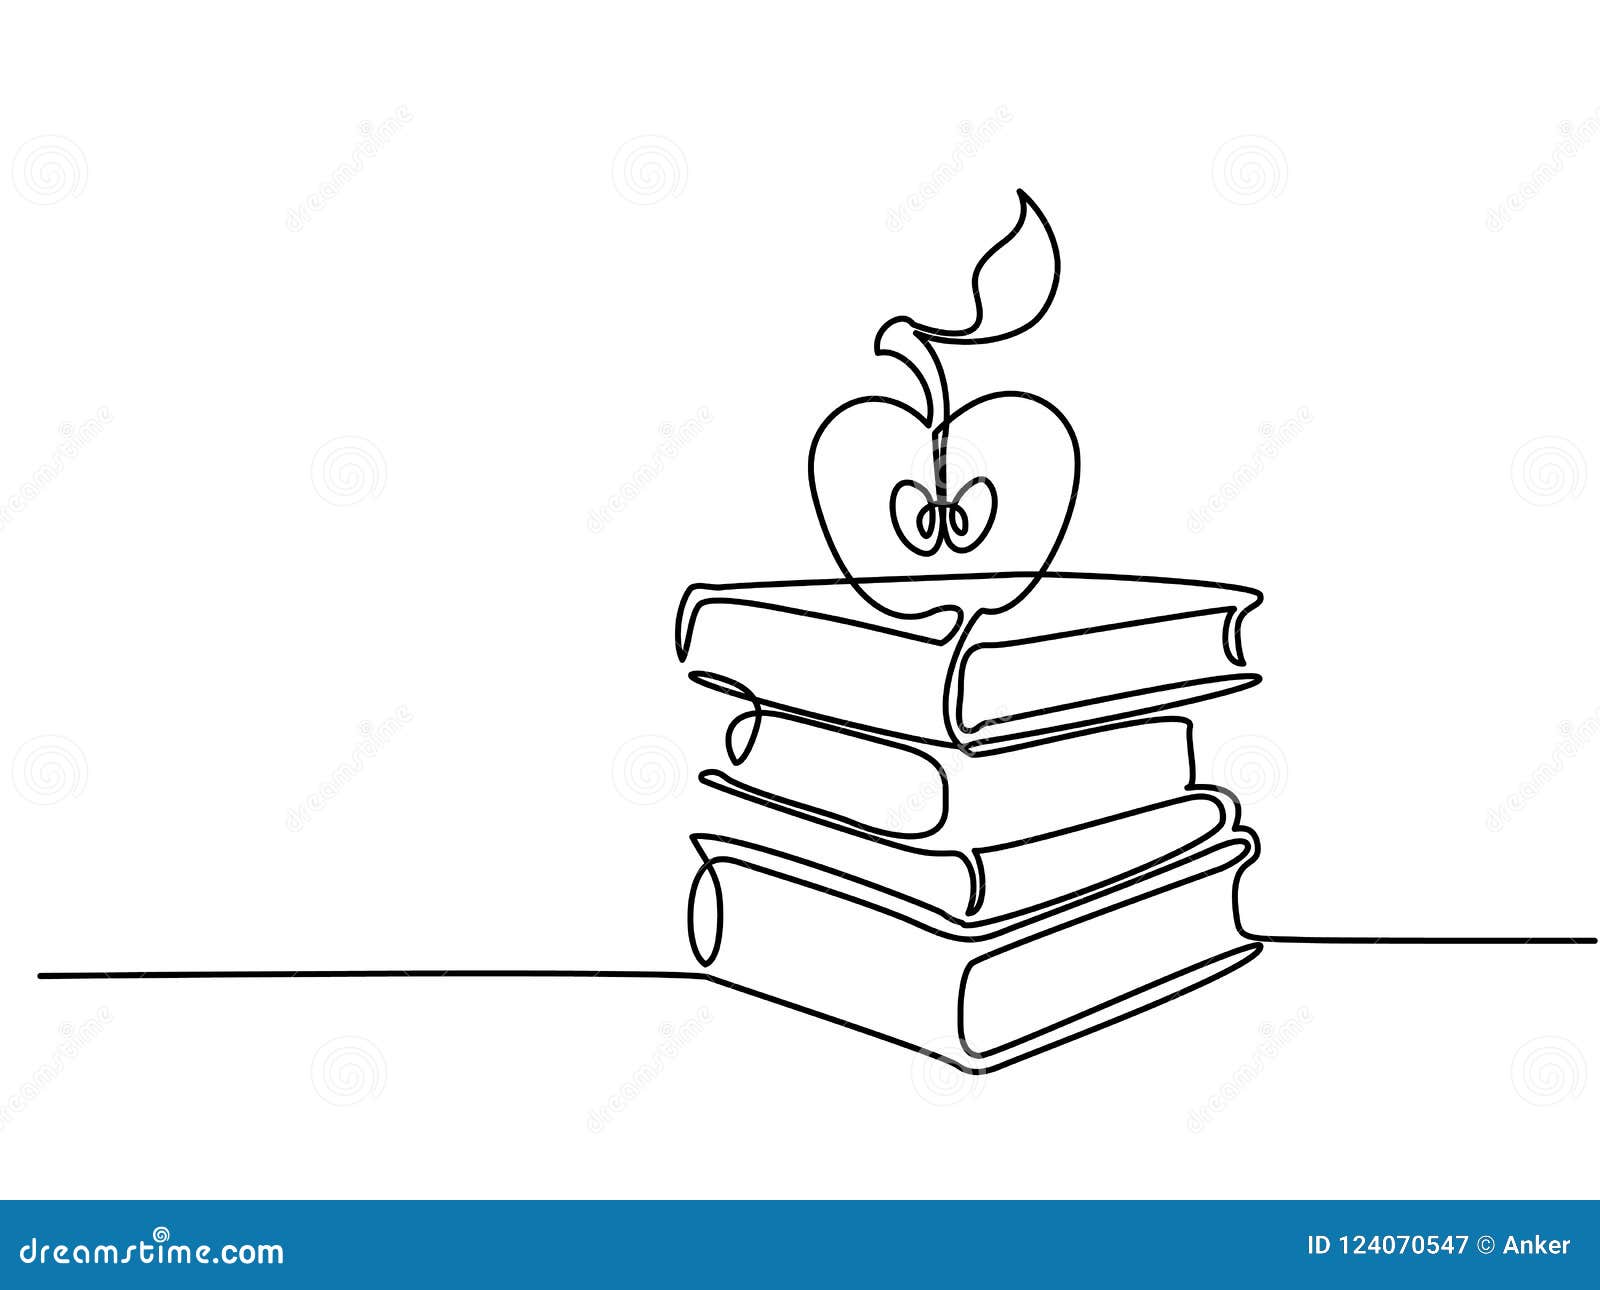 continuous line drawing. stack of books with apple